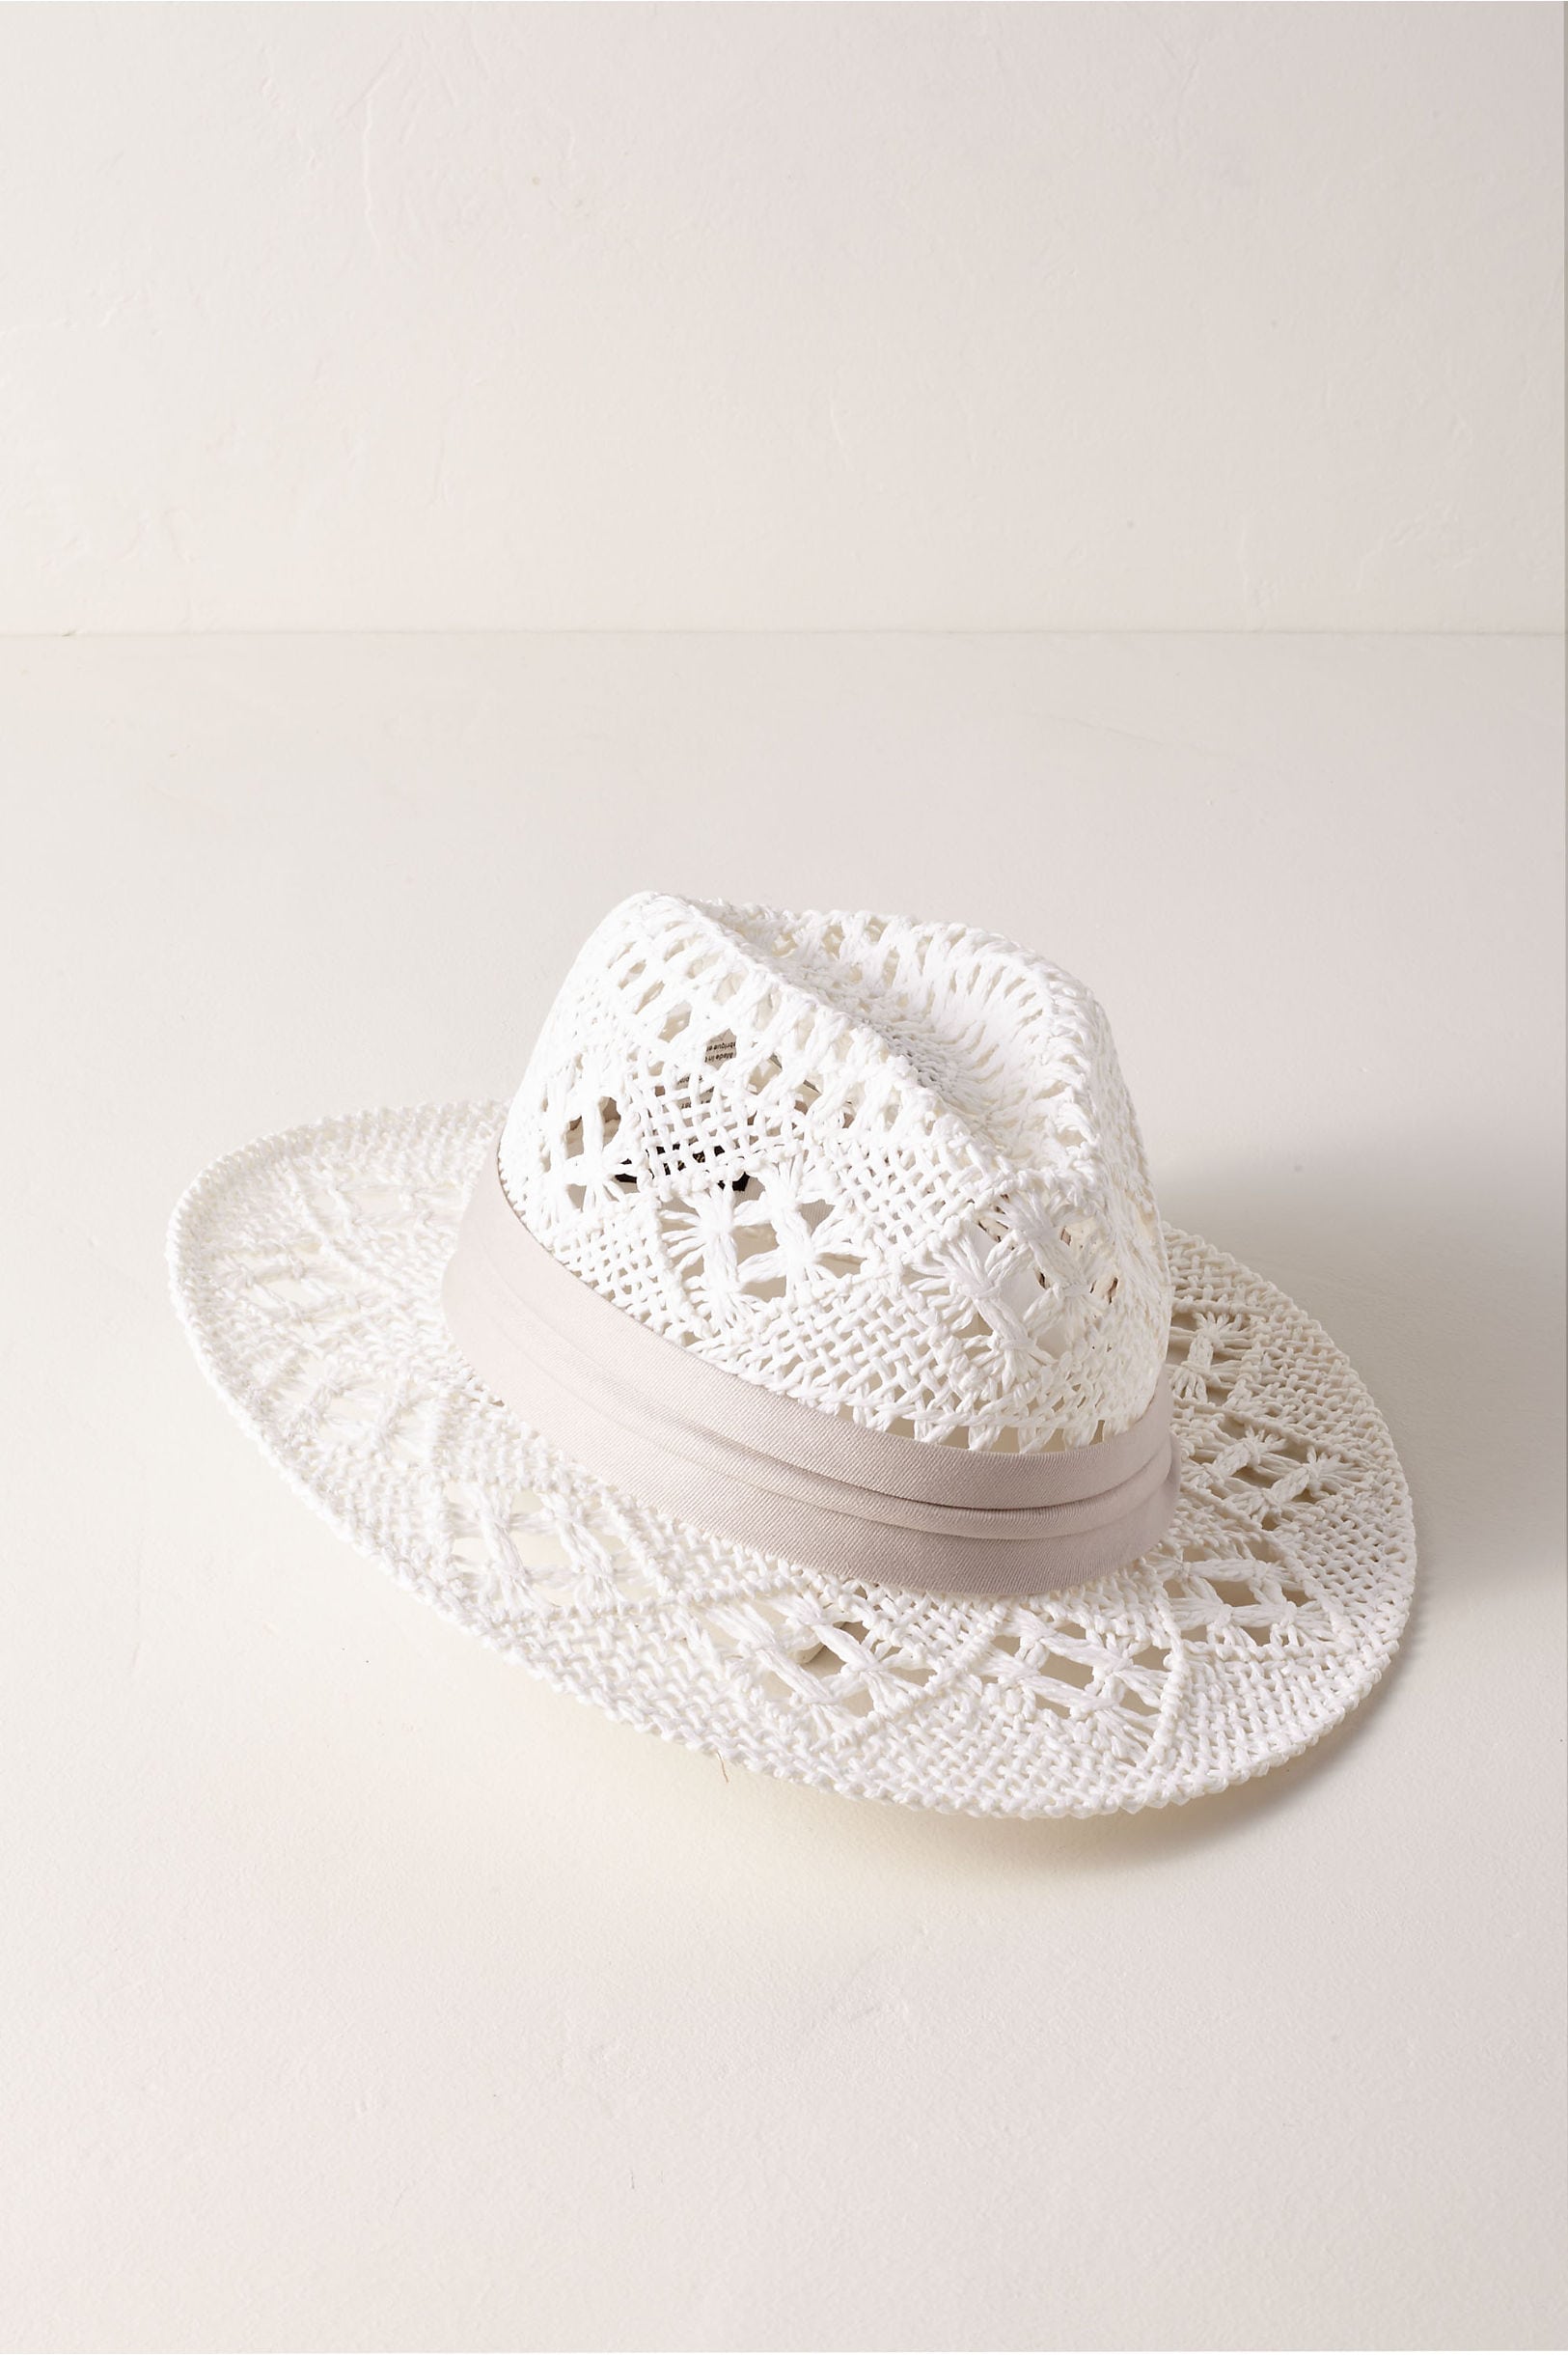 Jetsetter Panama Hat from BHLDN: woven lace hat